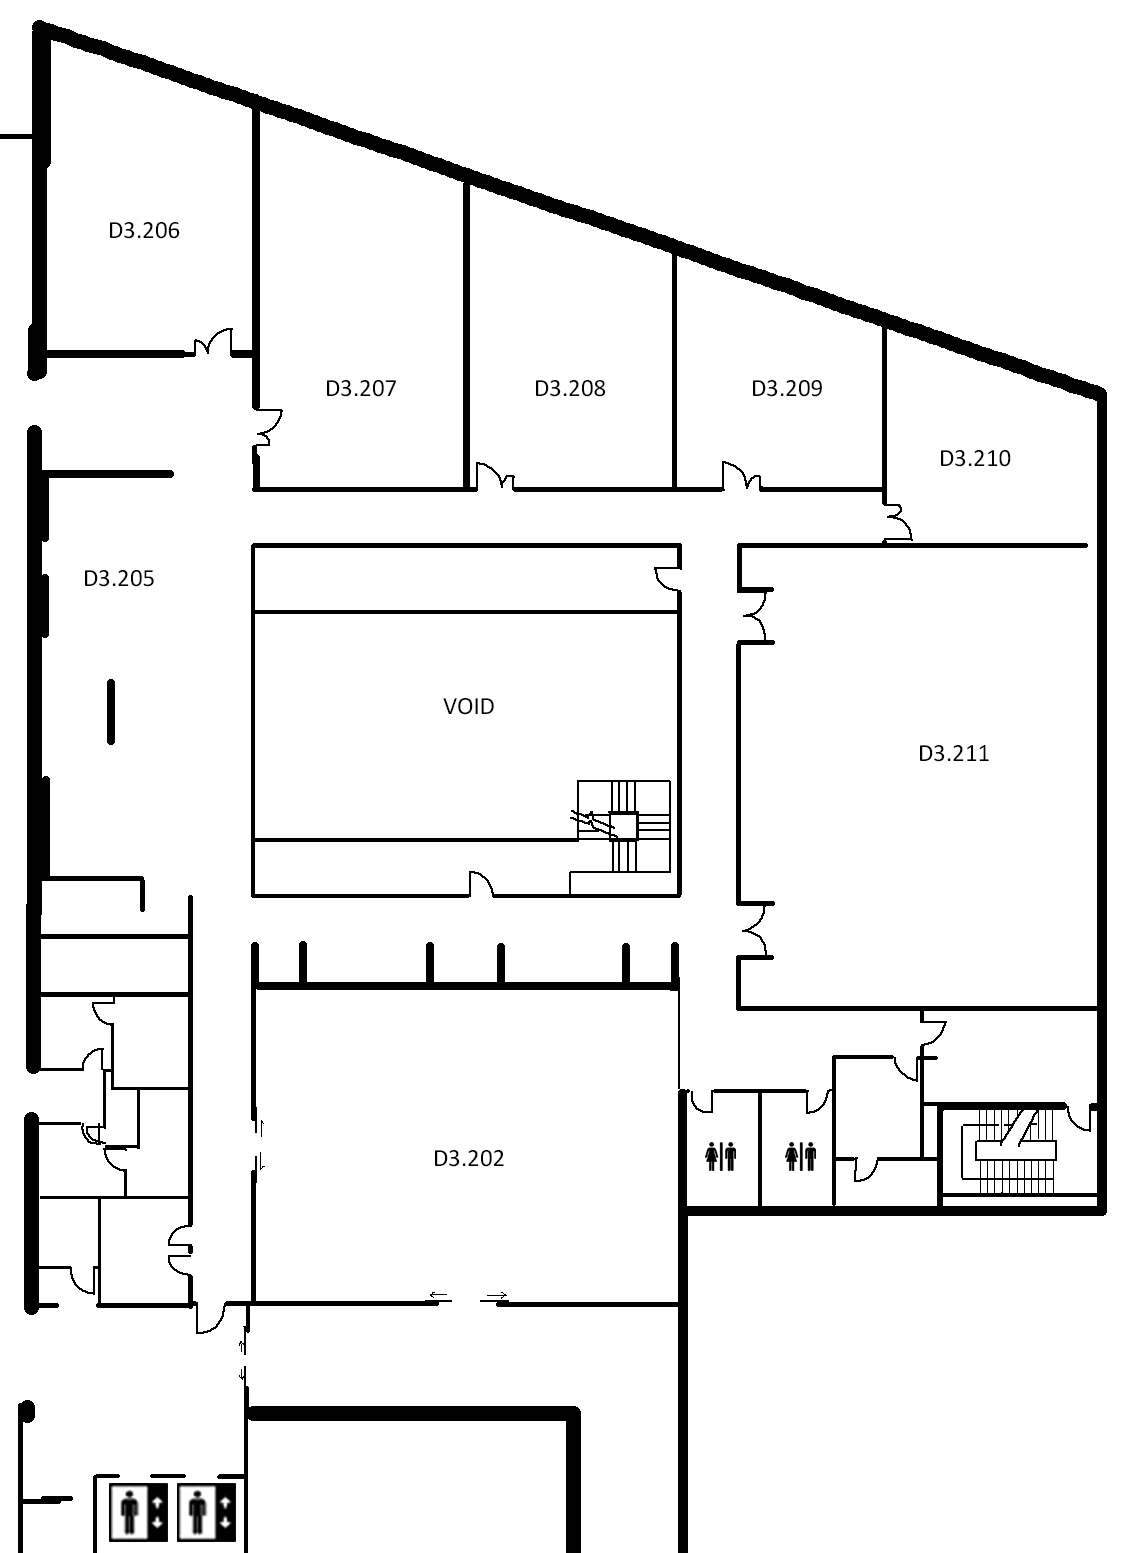 Map indicating the location of the rooms listed for Building D, level 3